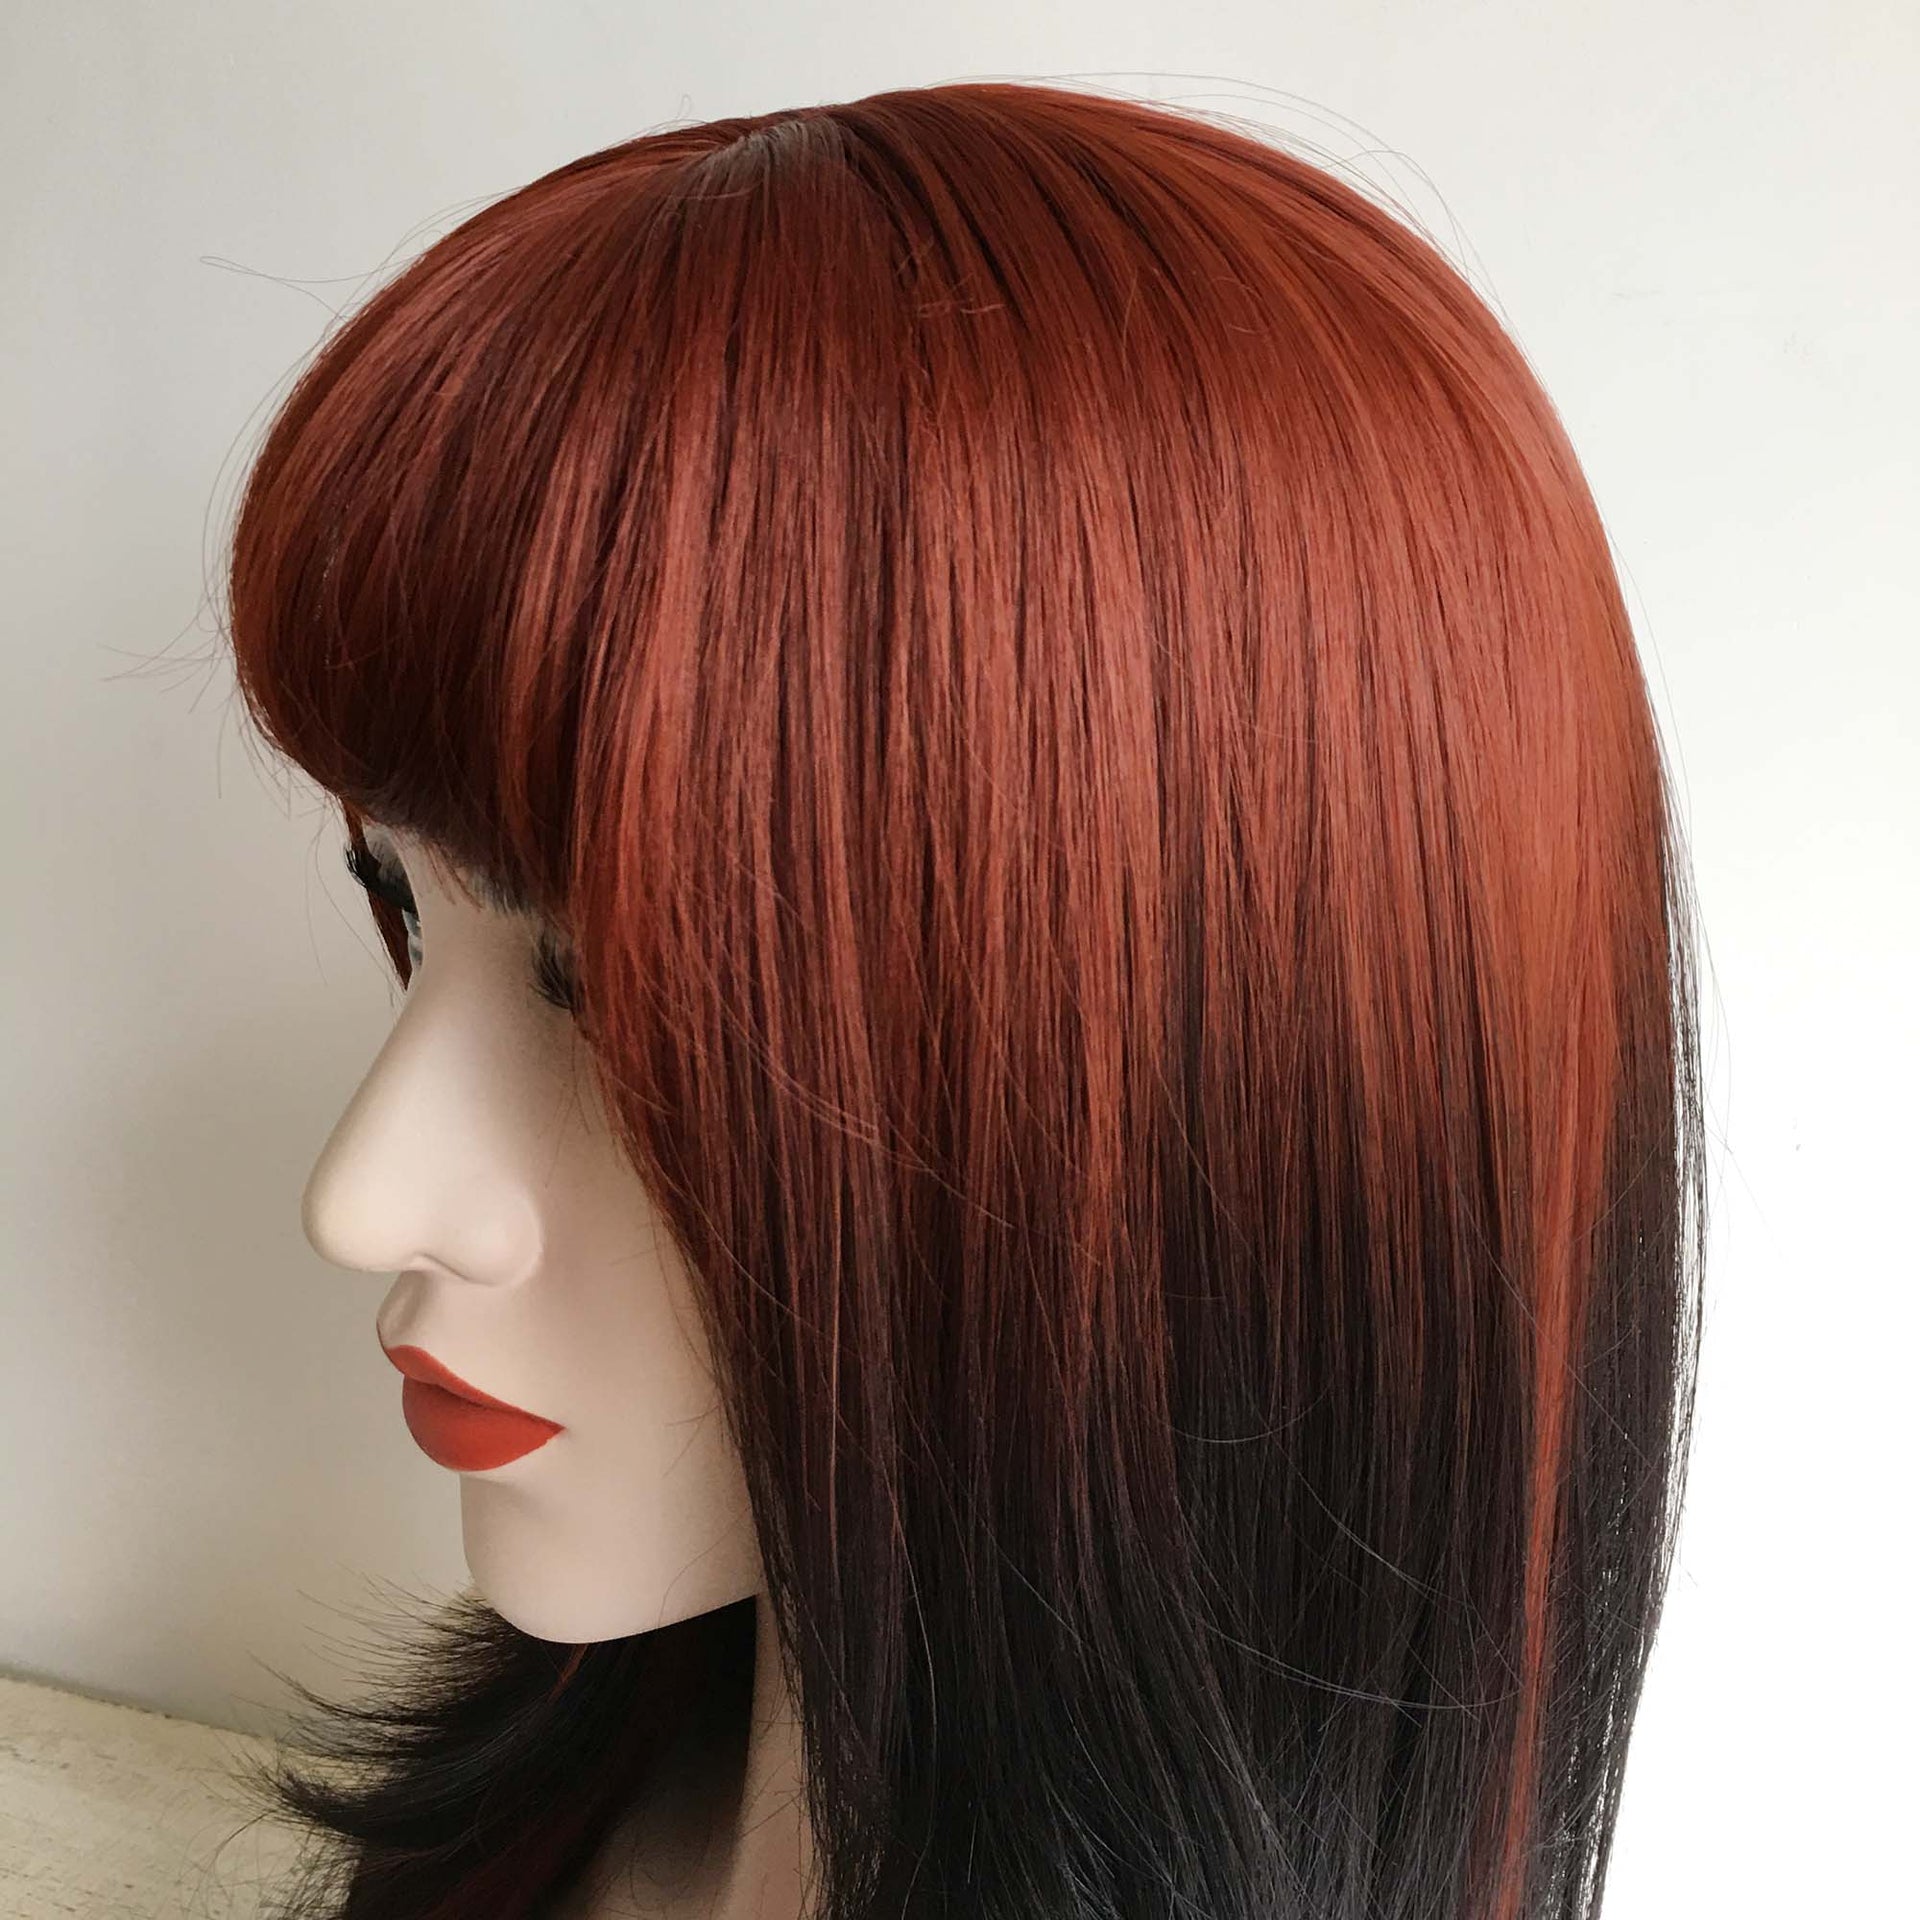 nevermindyrhead Red Wig Ombre Auburn And Black Long Straight Synthetic Women Bangs Wig